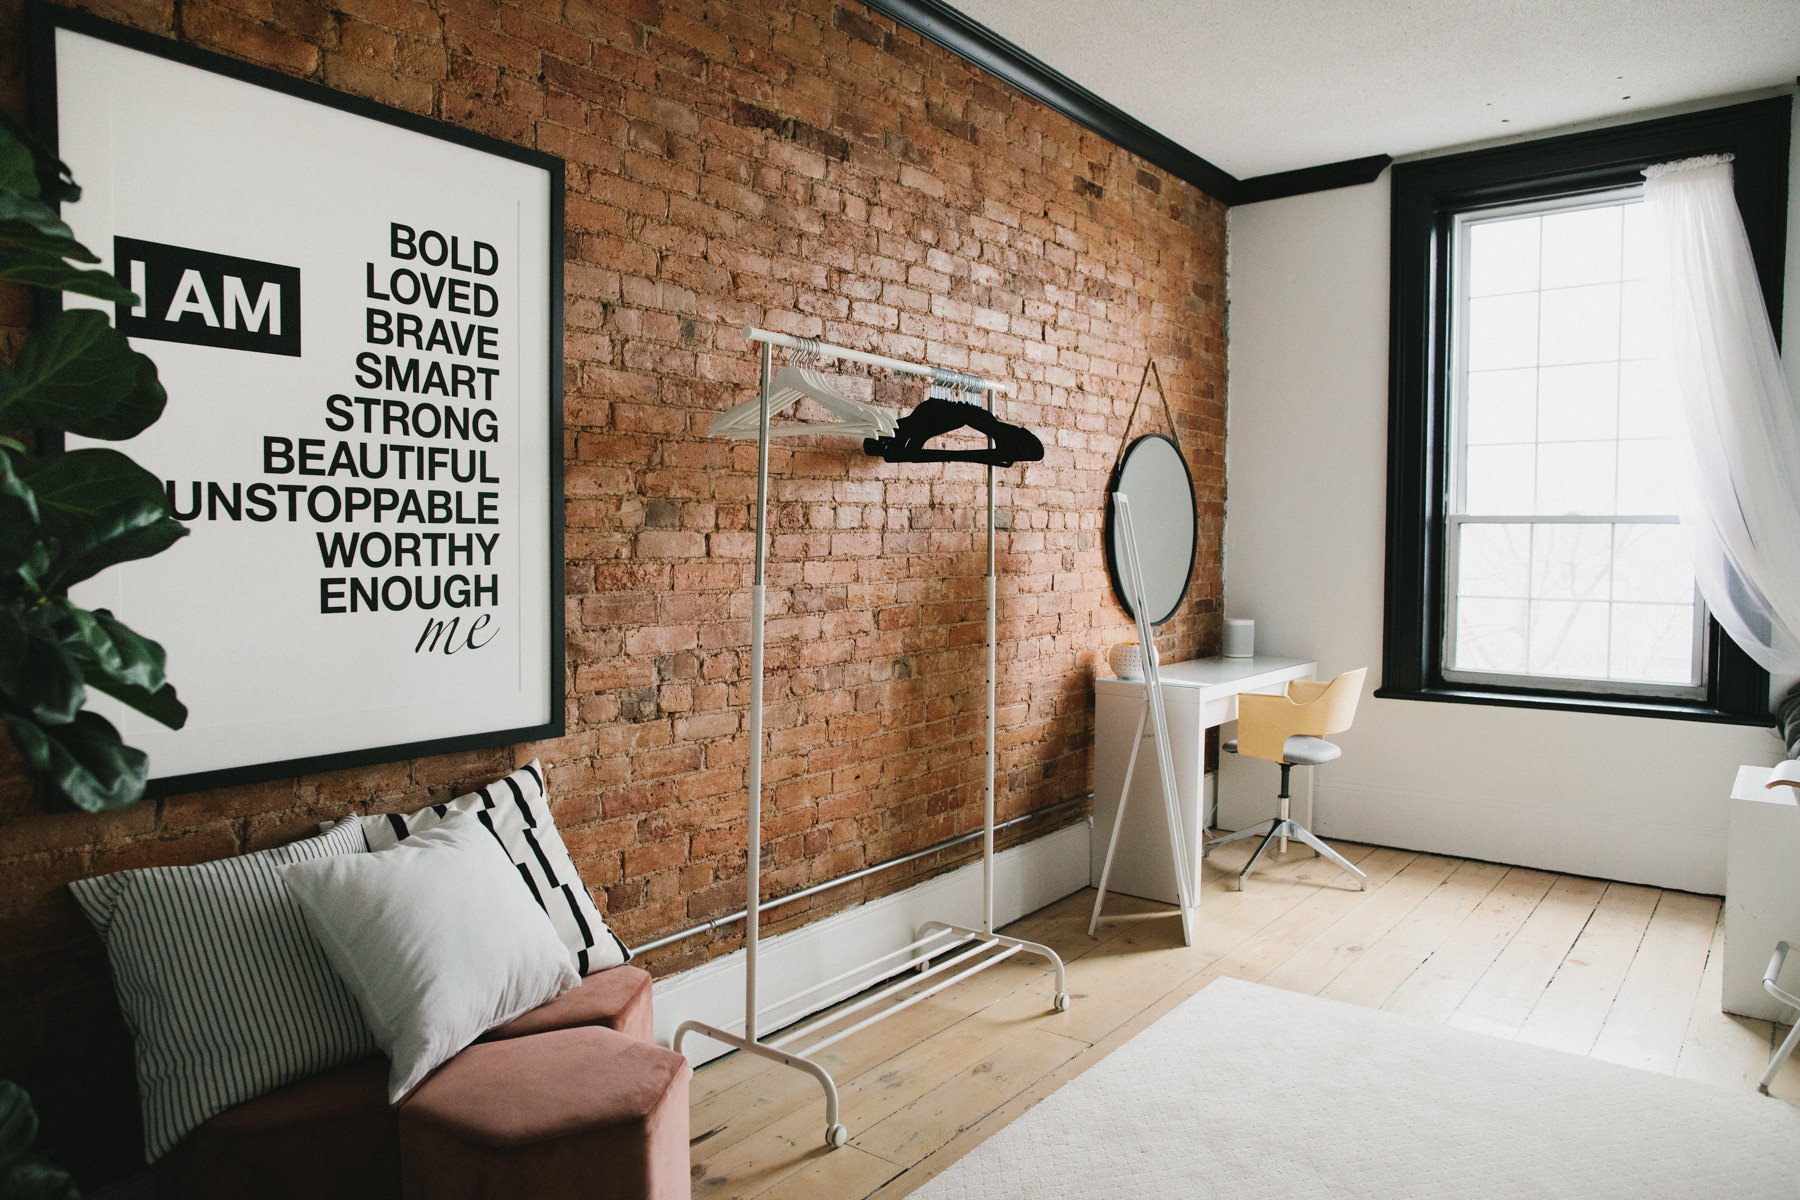 portrait studio hair and makeup room featuring a red brick wall and decorated with white furniture. Large wall art with a positive affirmation message is also featured.